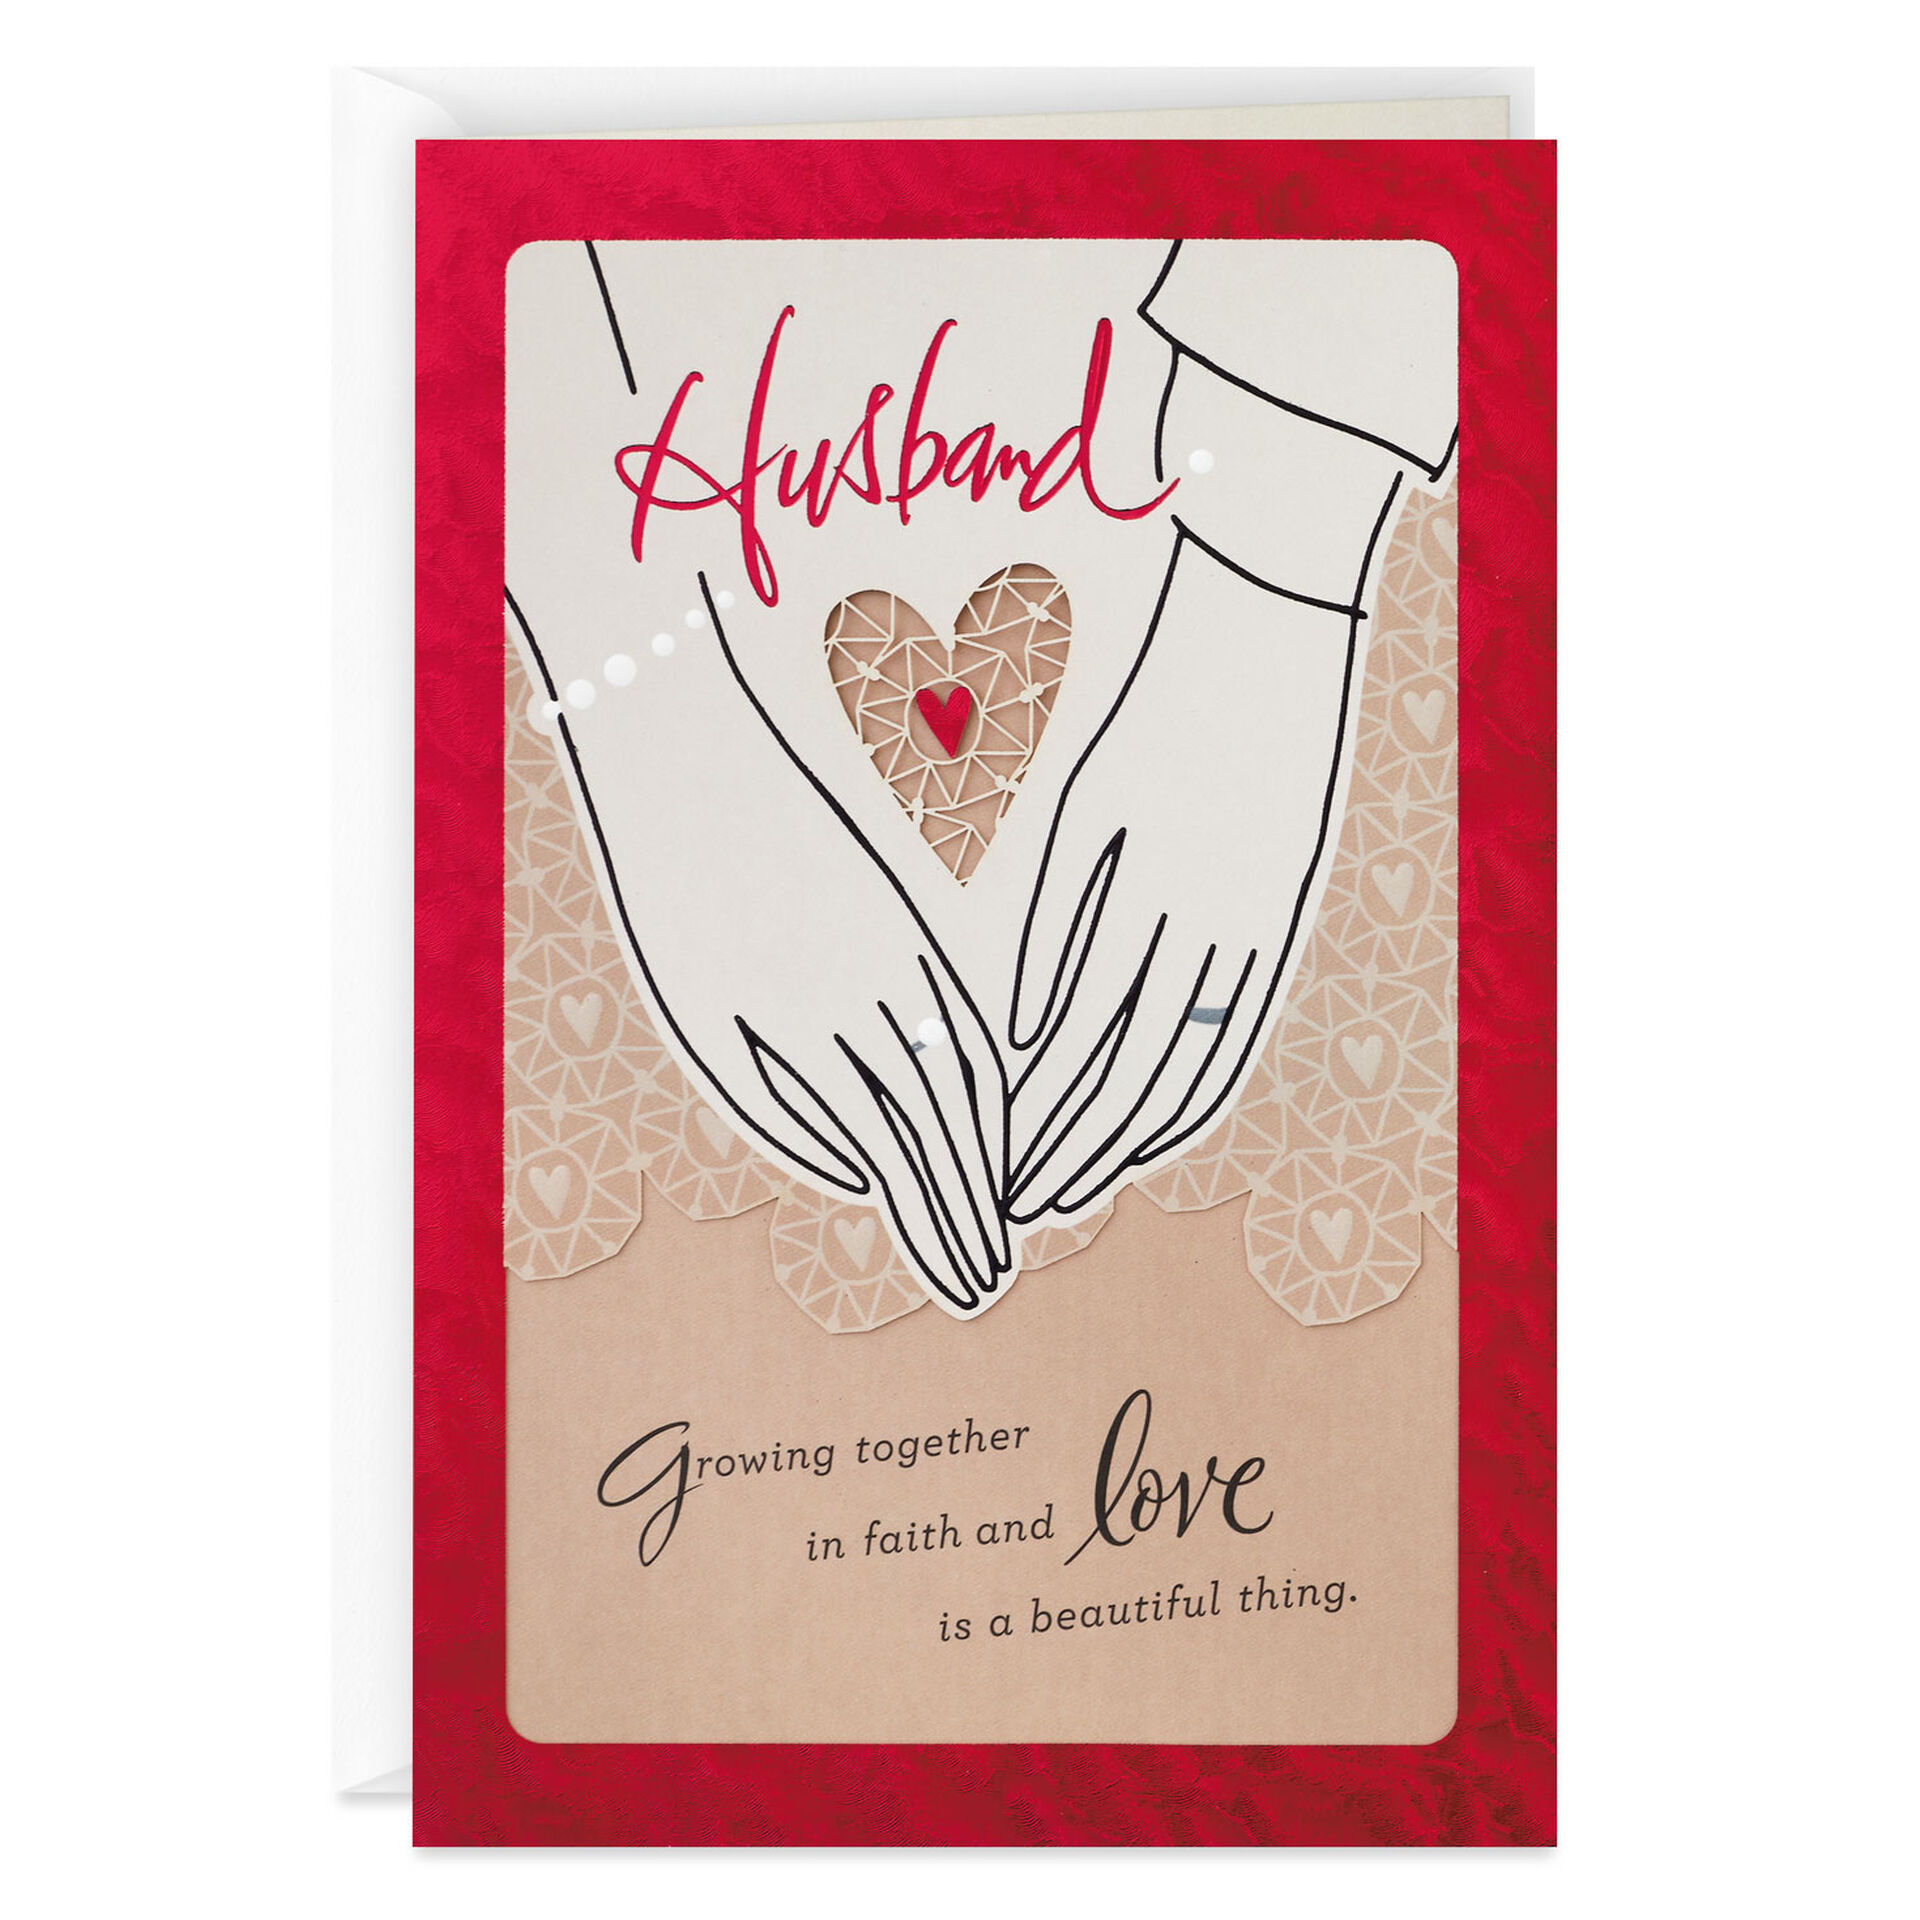 Hearts-and-Hands-Religious-Valentines-Day-Card-for-Husband_599VCE6993_01